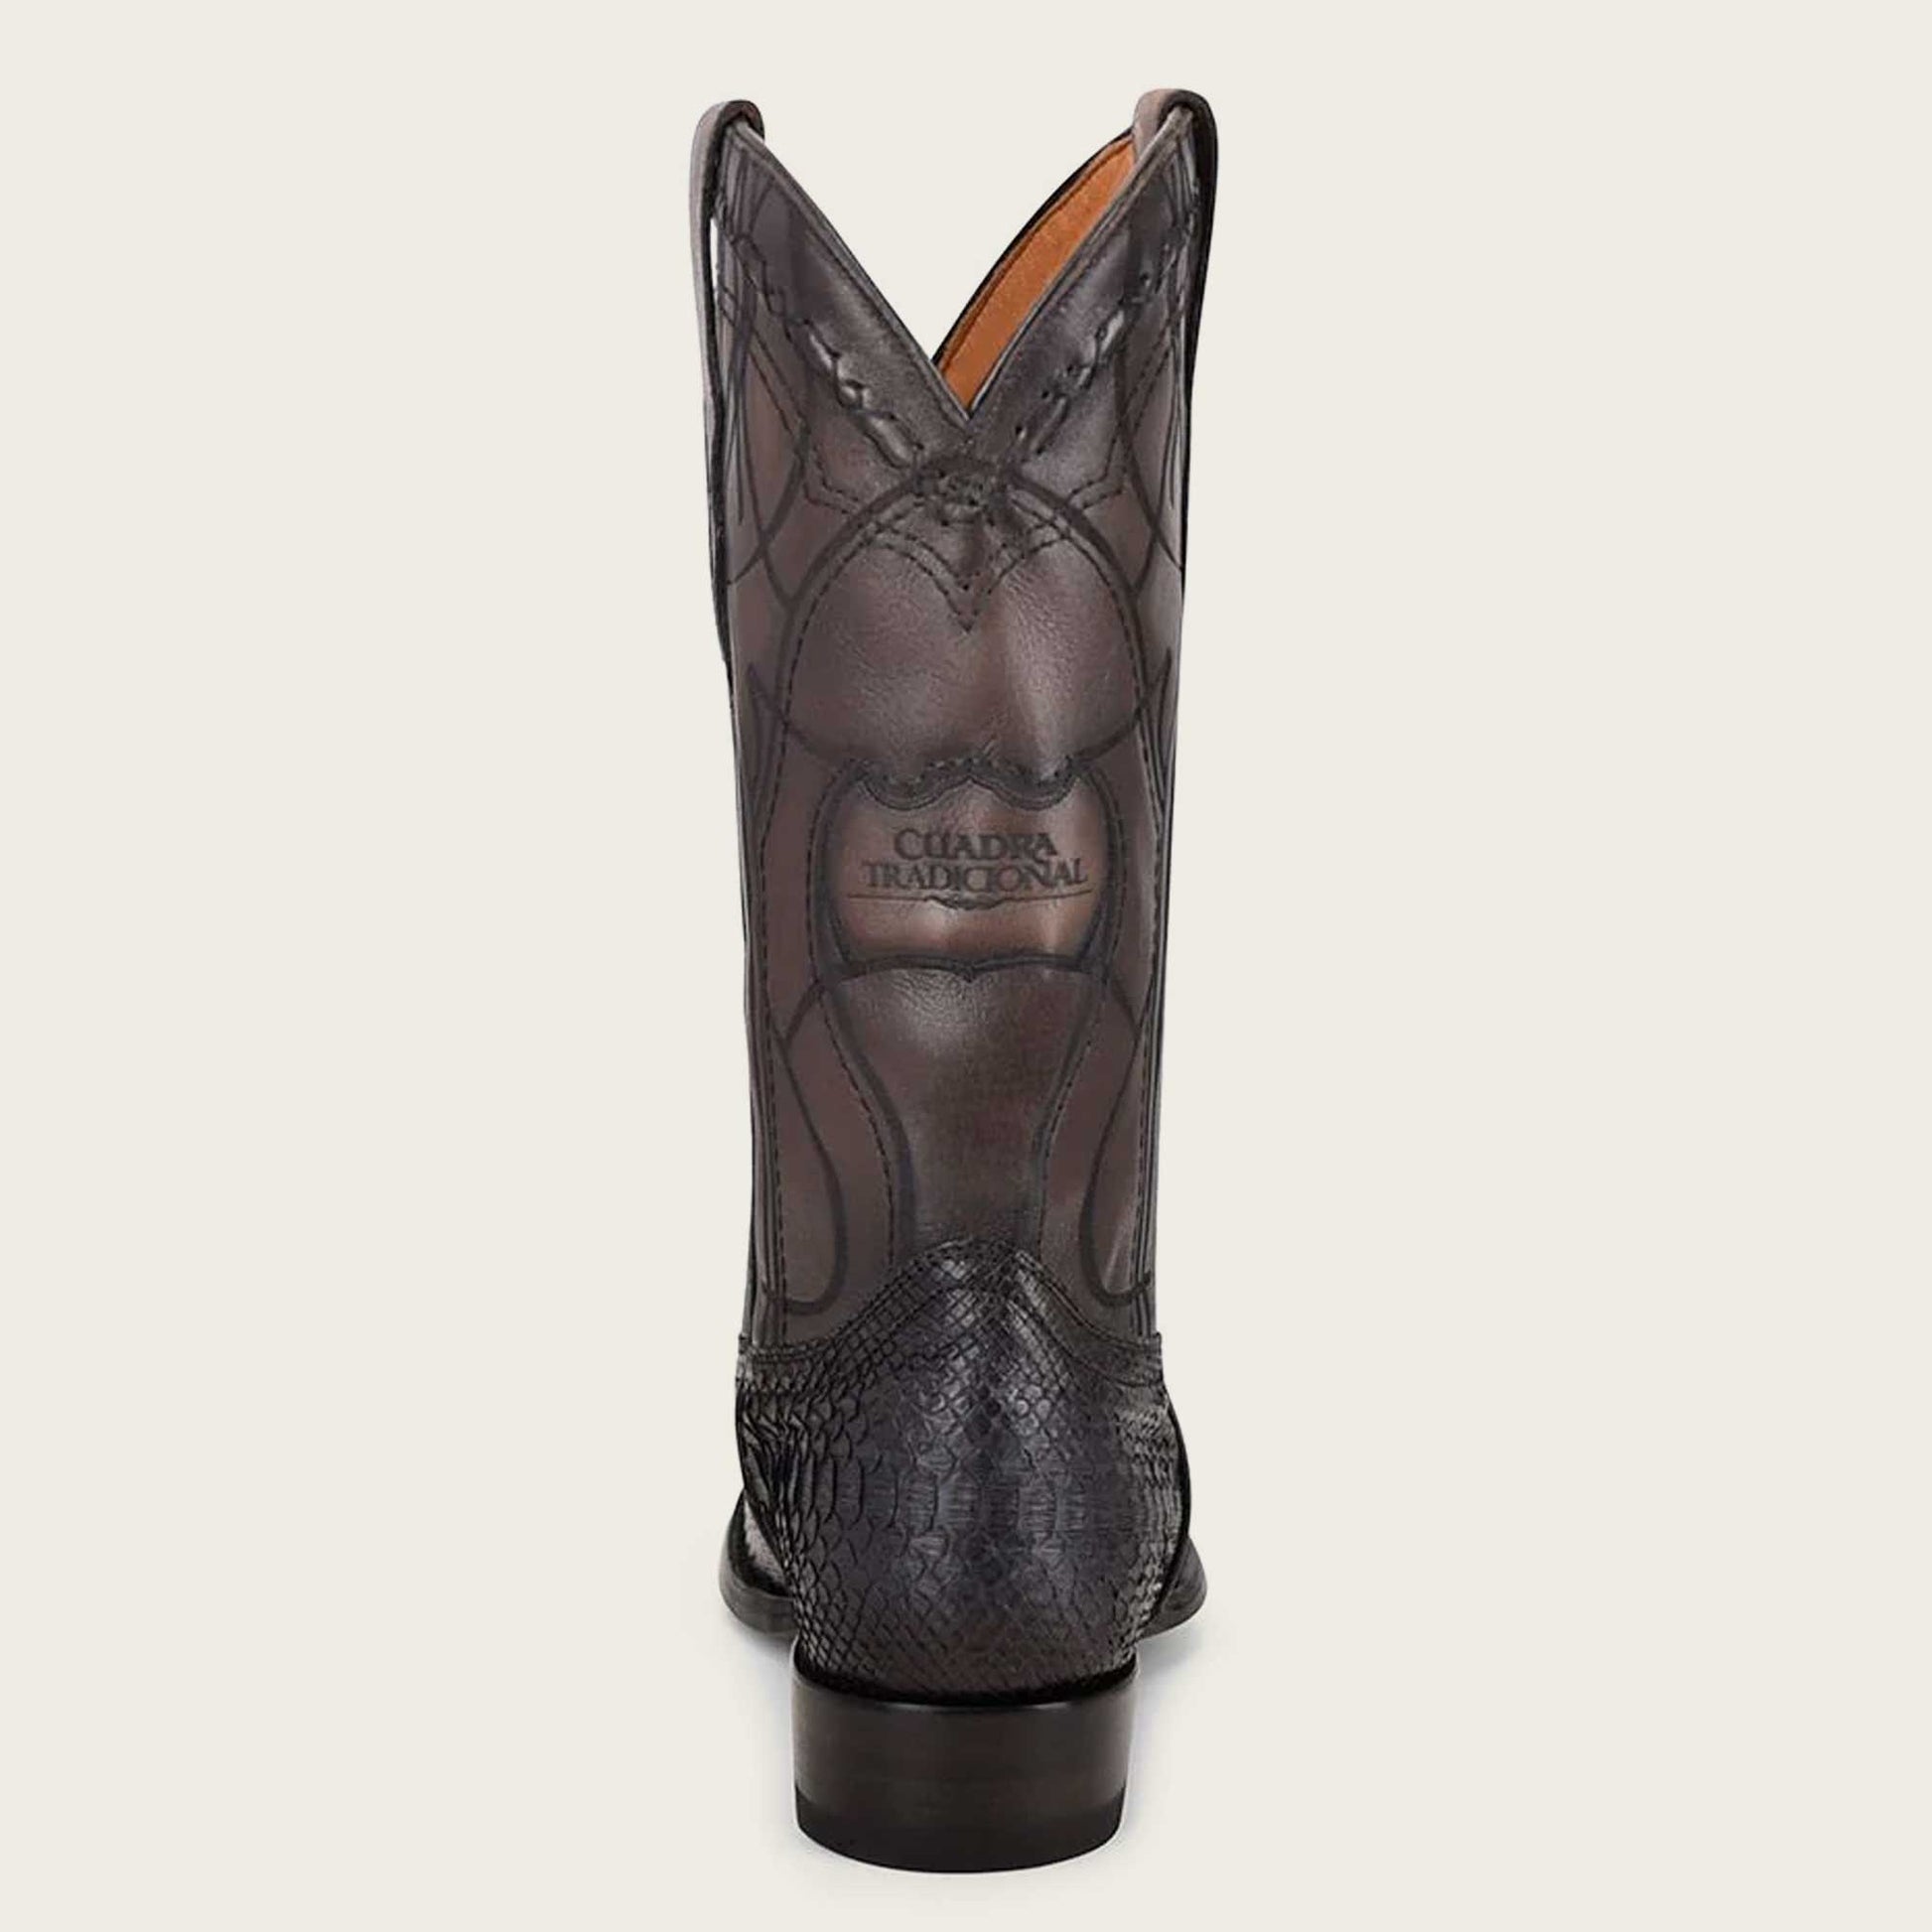 Stylish black python leather Western boot with intricate engraving and striking embroidery on the shaft.